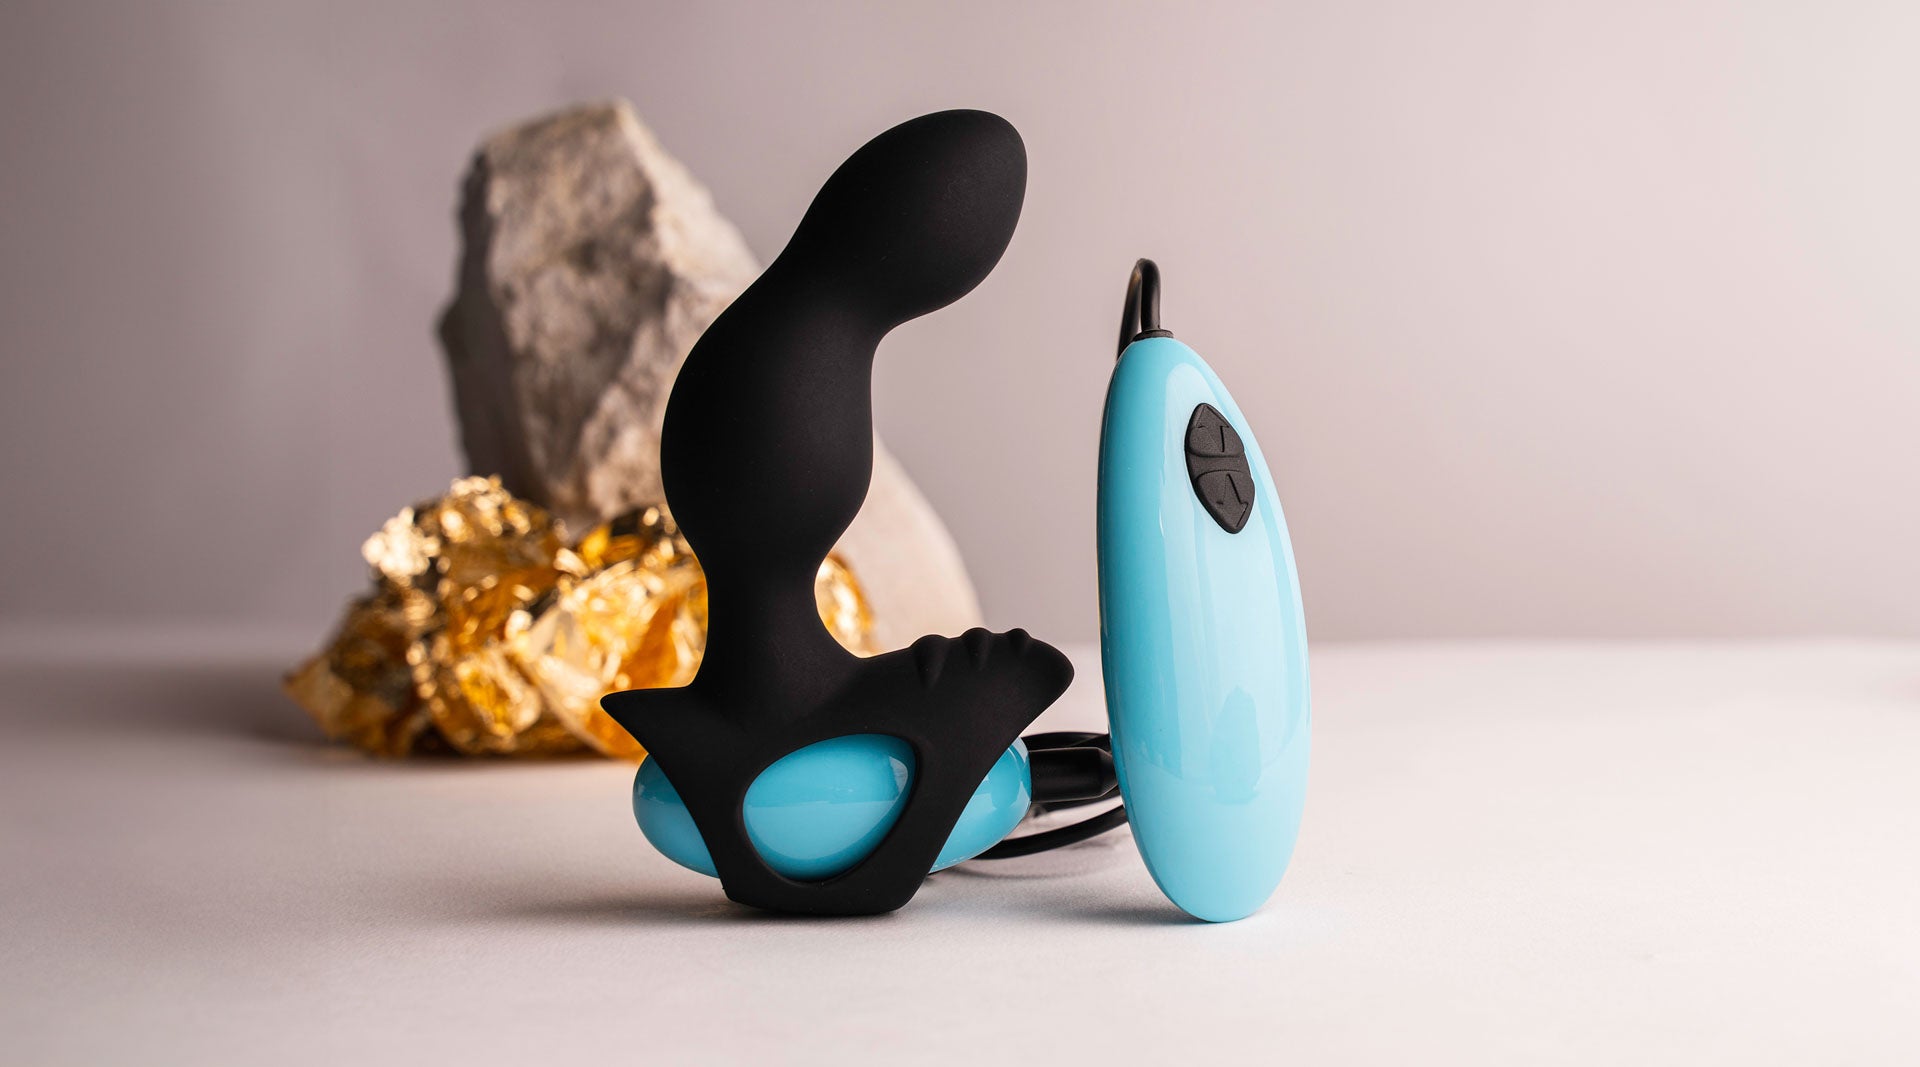 Remote controlled prostate vibrator in black and blue with a ribbed perineum pleasure point.